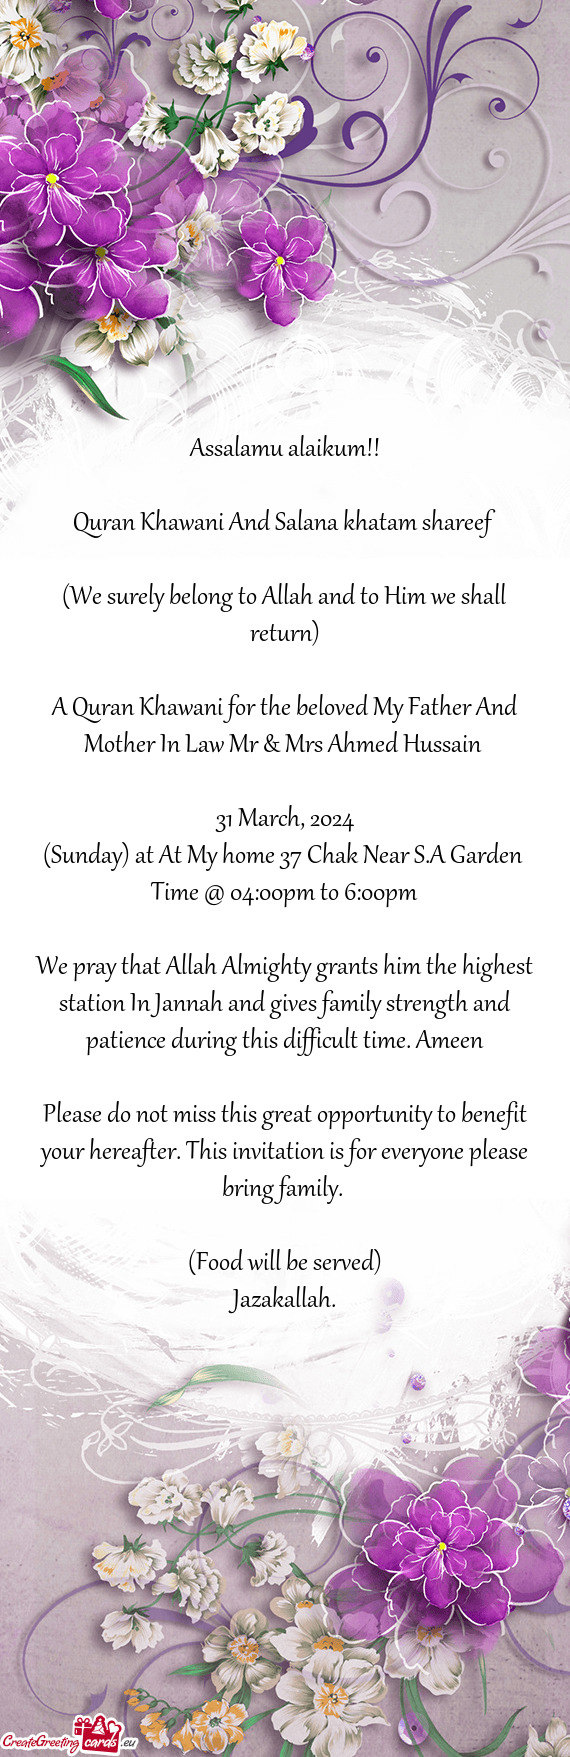 A Quran Khawani for the beloved My Father And Mother In Law Mr & Mrs Ahmed Hussain